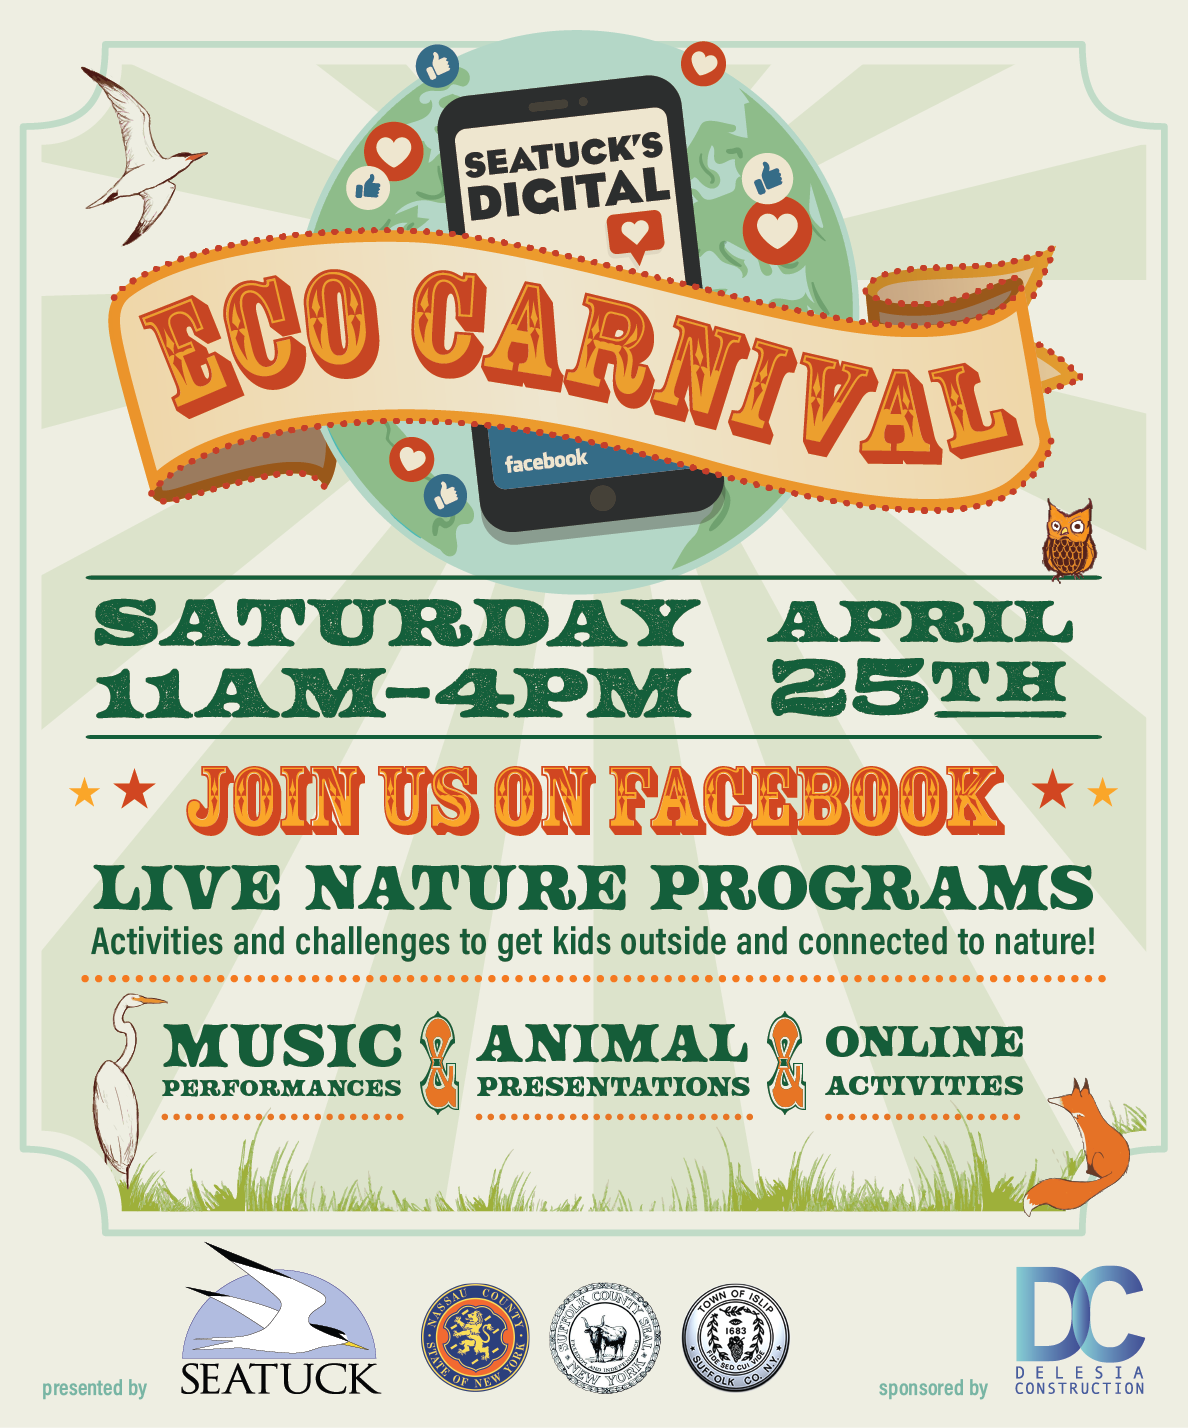 A flyer announcing the digital eco carnival event with musical performances, animal presentations and online activites for kids